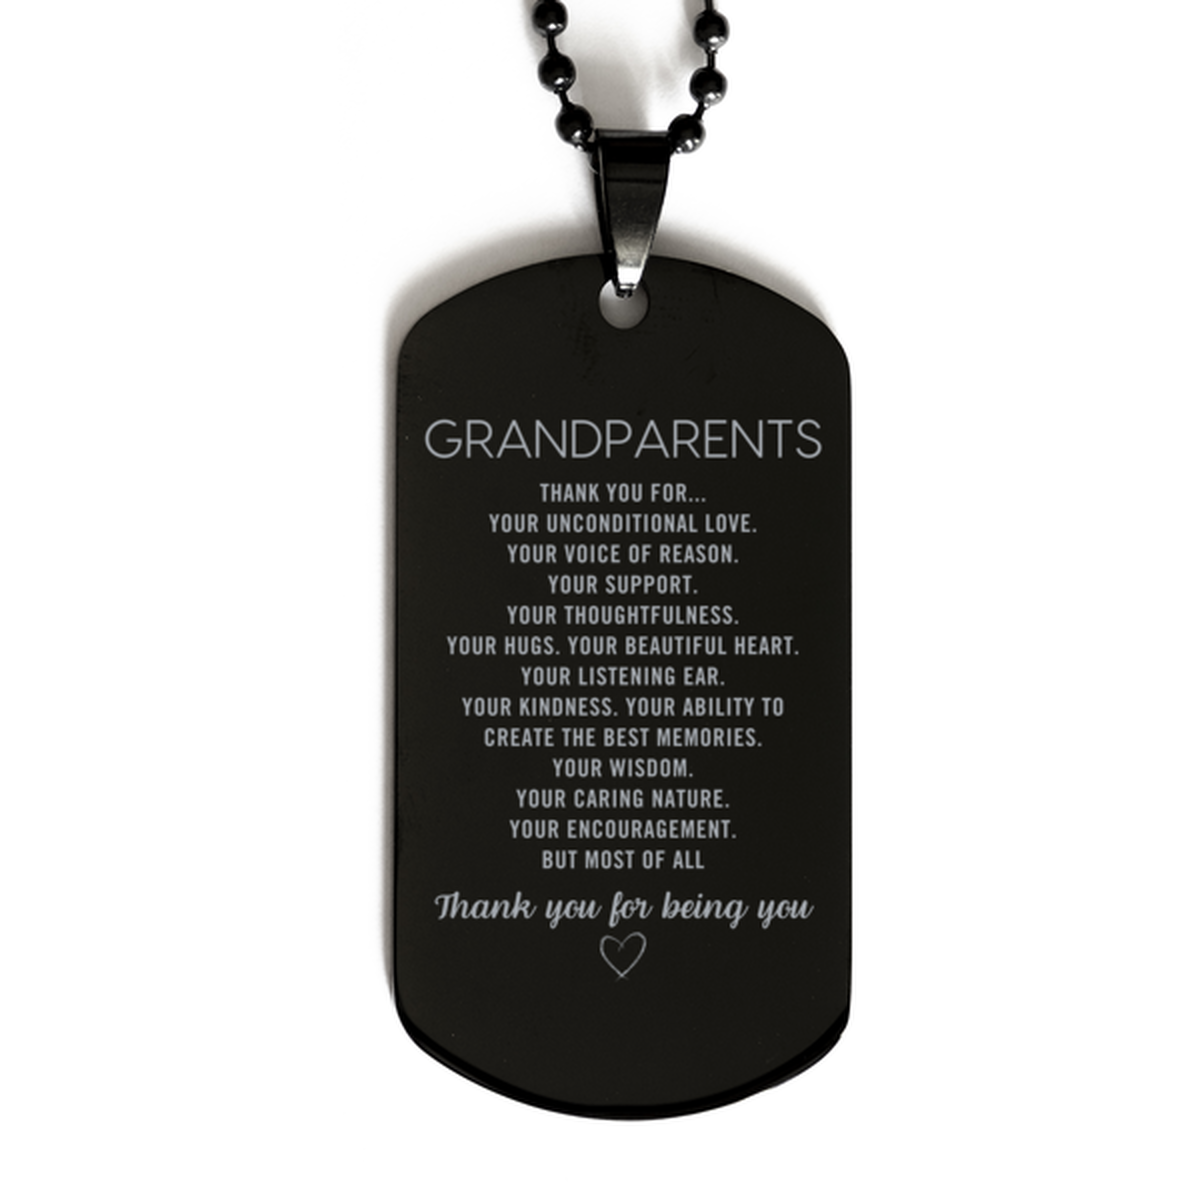 Grandparents Black Dog Tag Custom, Engraved Gifts For Grandparents Christmas Graduation Birthday Gifts for Men Women Grandparents Thank you for Your unconditional love